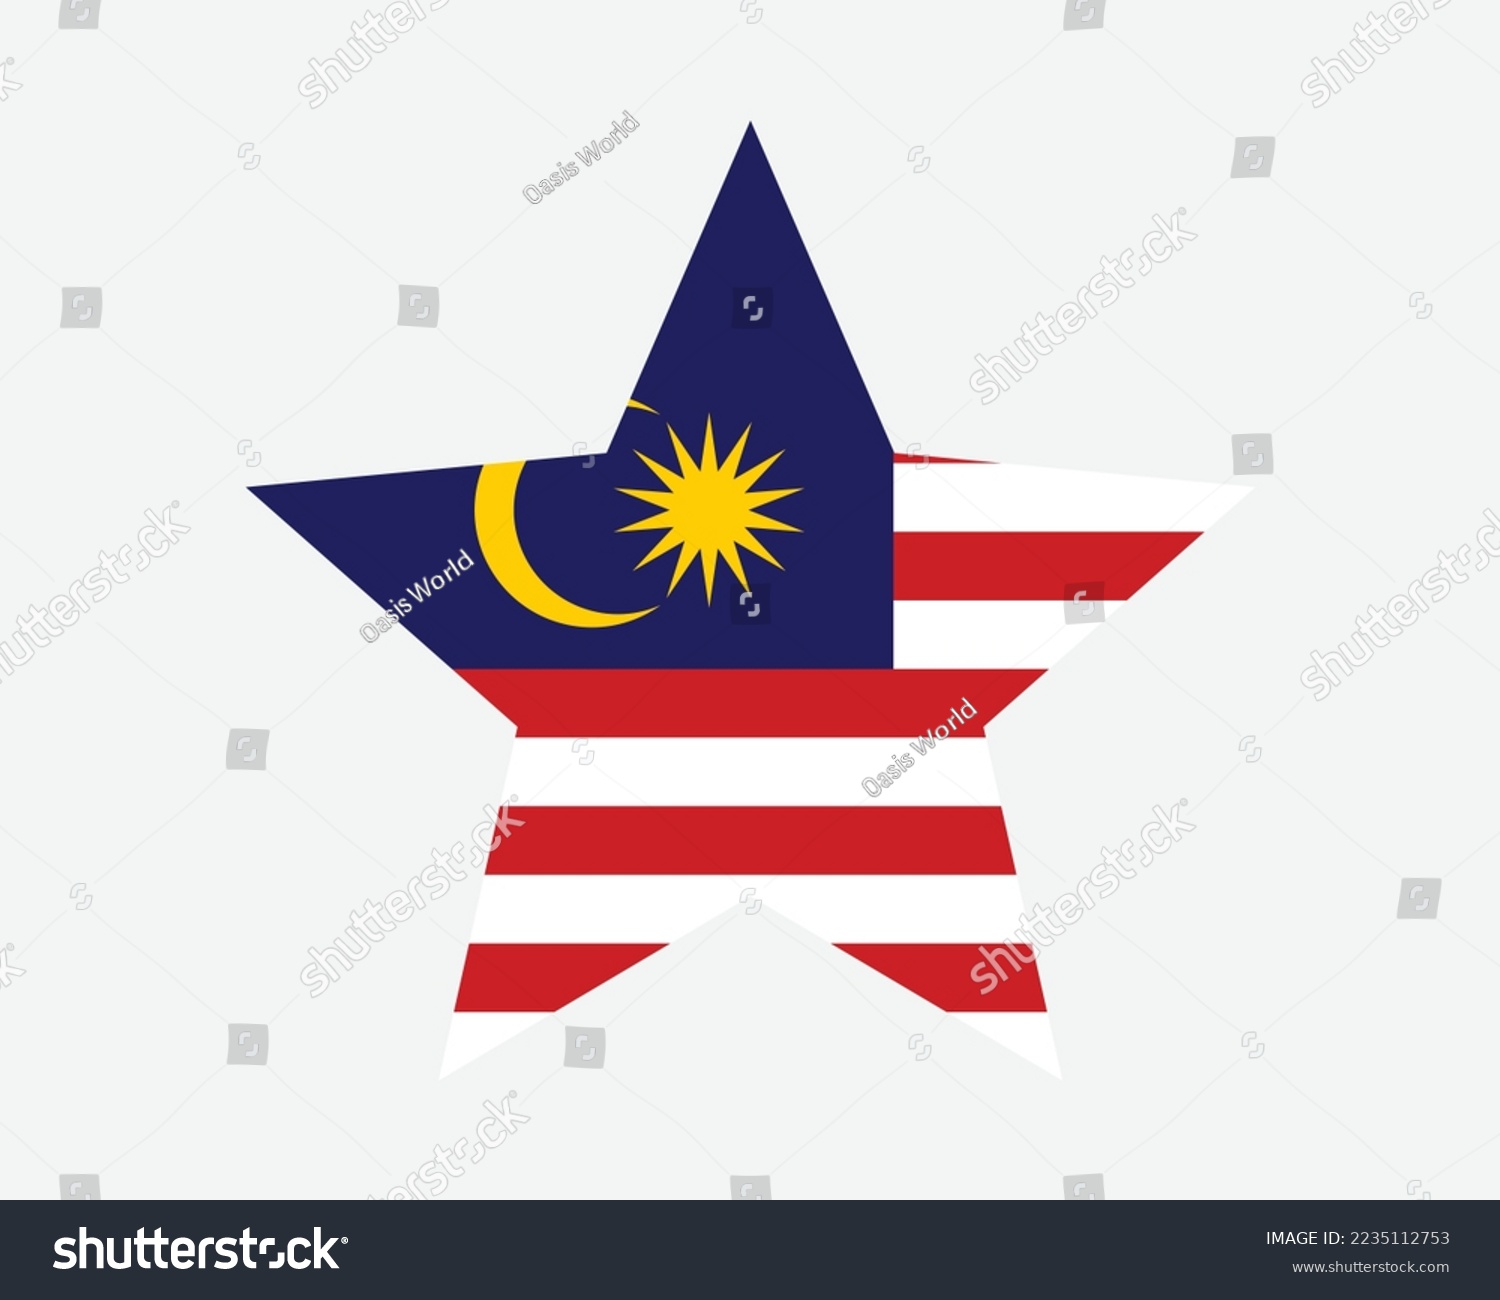 SVG of Malaysia Star Flag. Malaysian Star Shape Flag. Country National Banner Icon Symbol Vector Flat Artwork Graphic Illustration svg